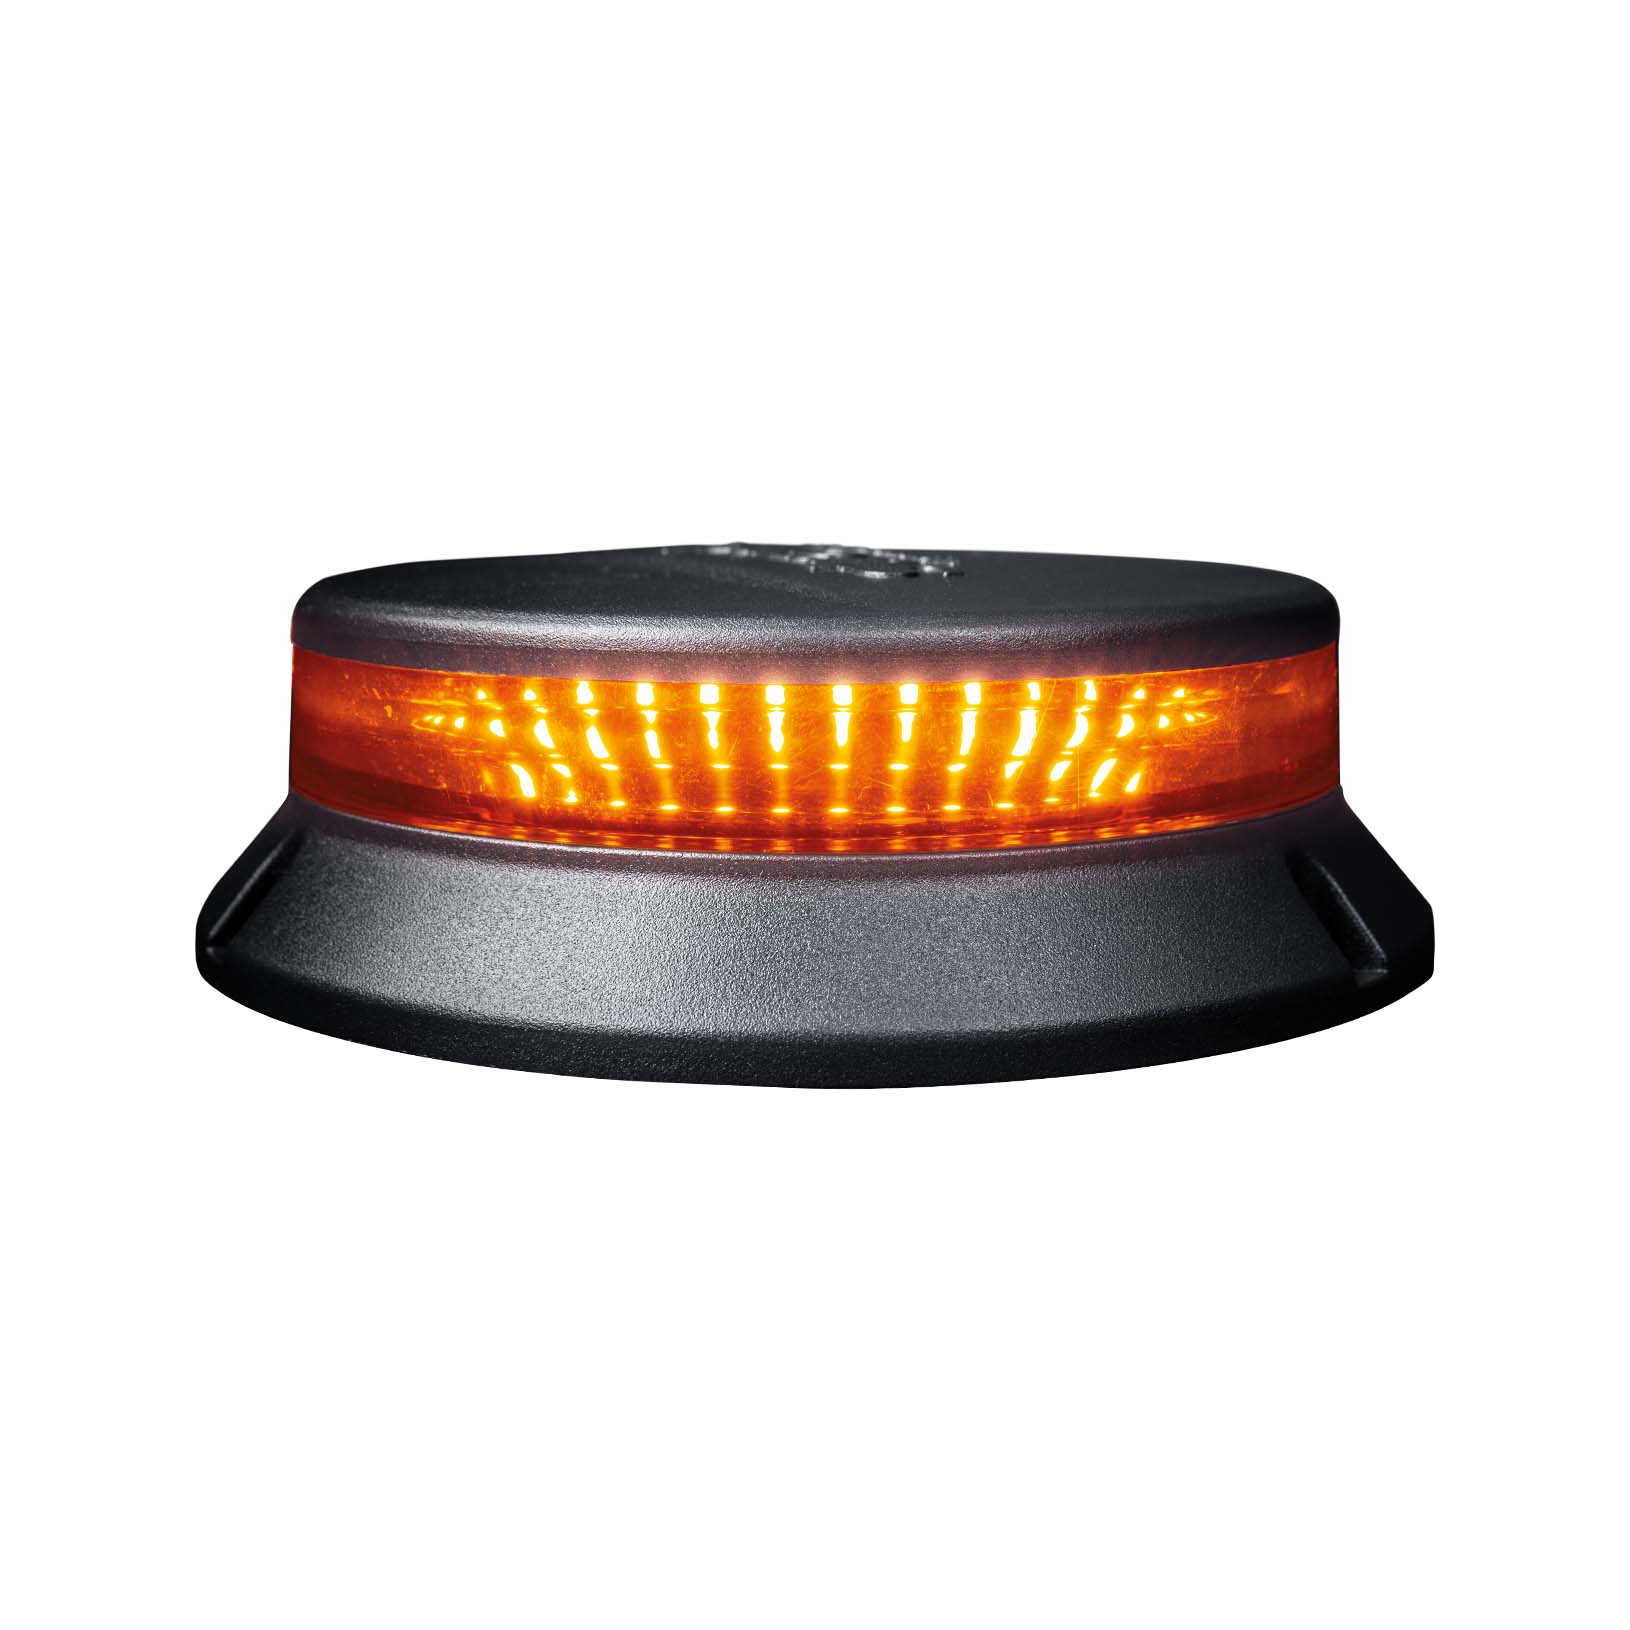 Cruise Light - Led - Donkere lens | Zwaailampen | Verlichting | Matro Truck Accessories